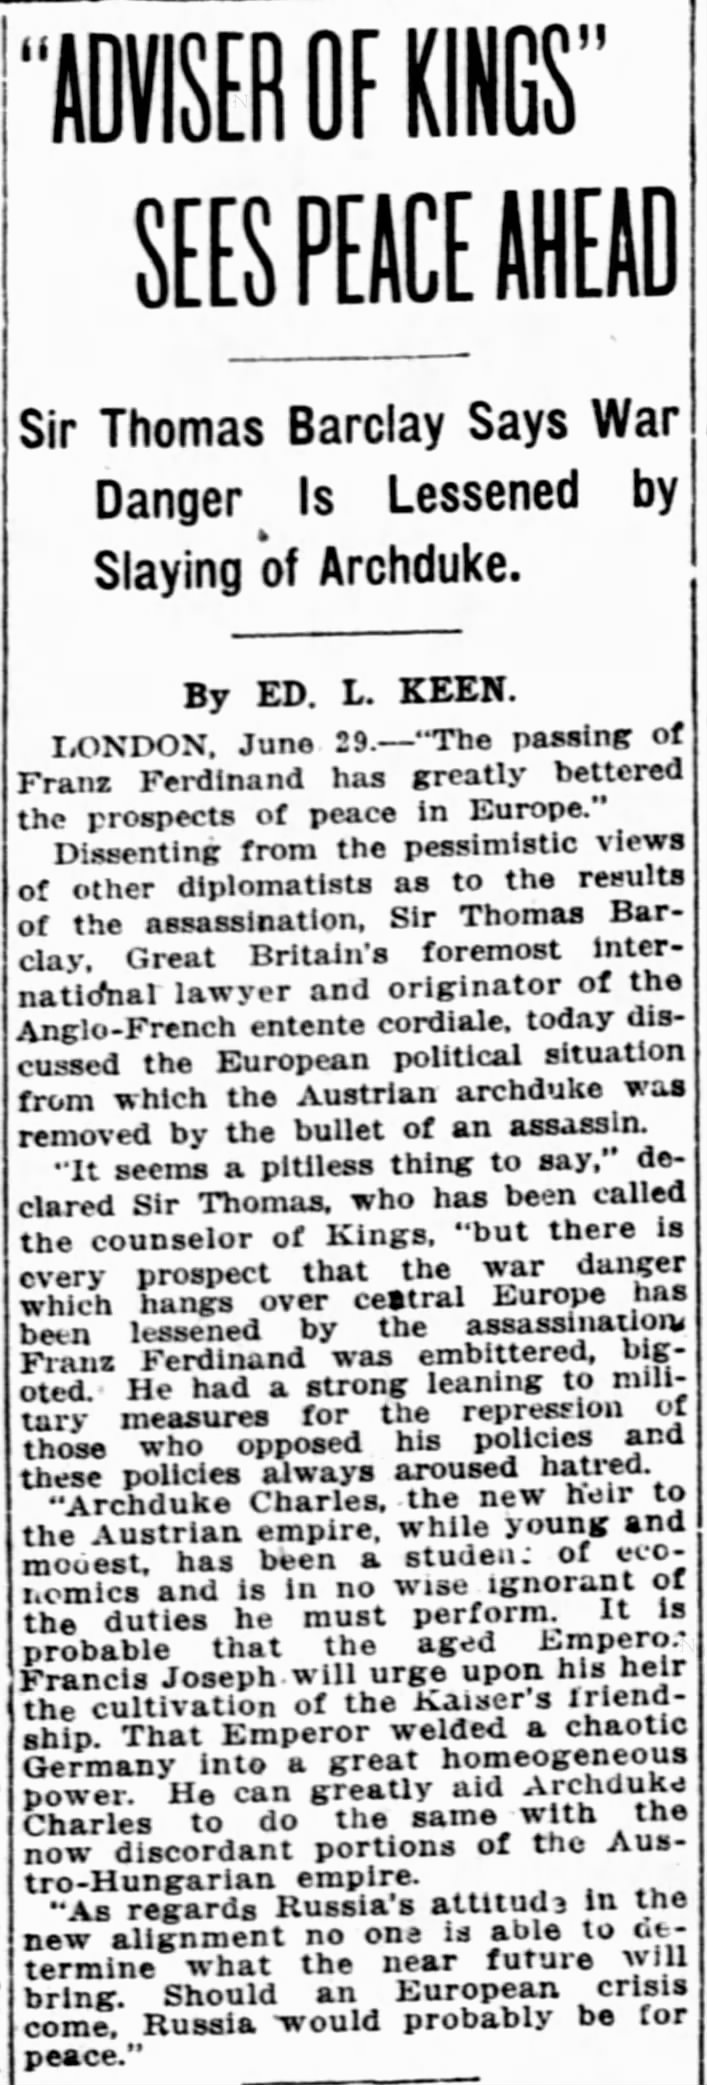 Sir Thomas Barclay claims the assassination of Archduke Franz Ferdinand will bring peace to Europe